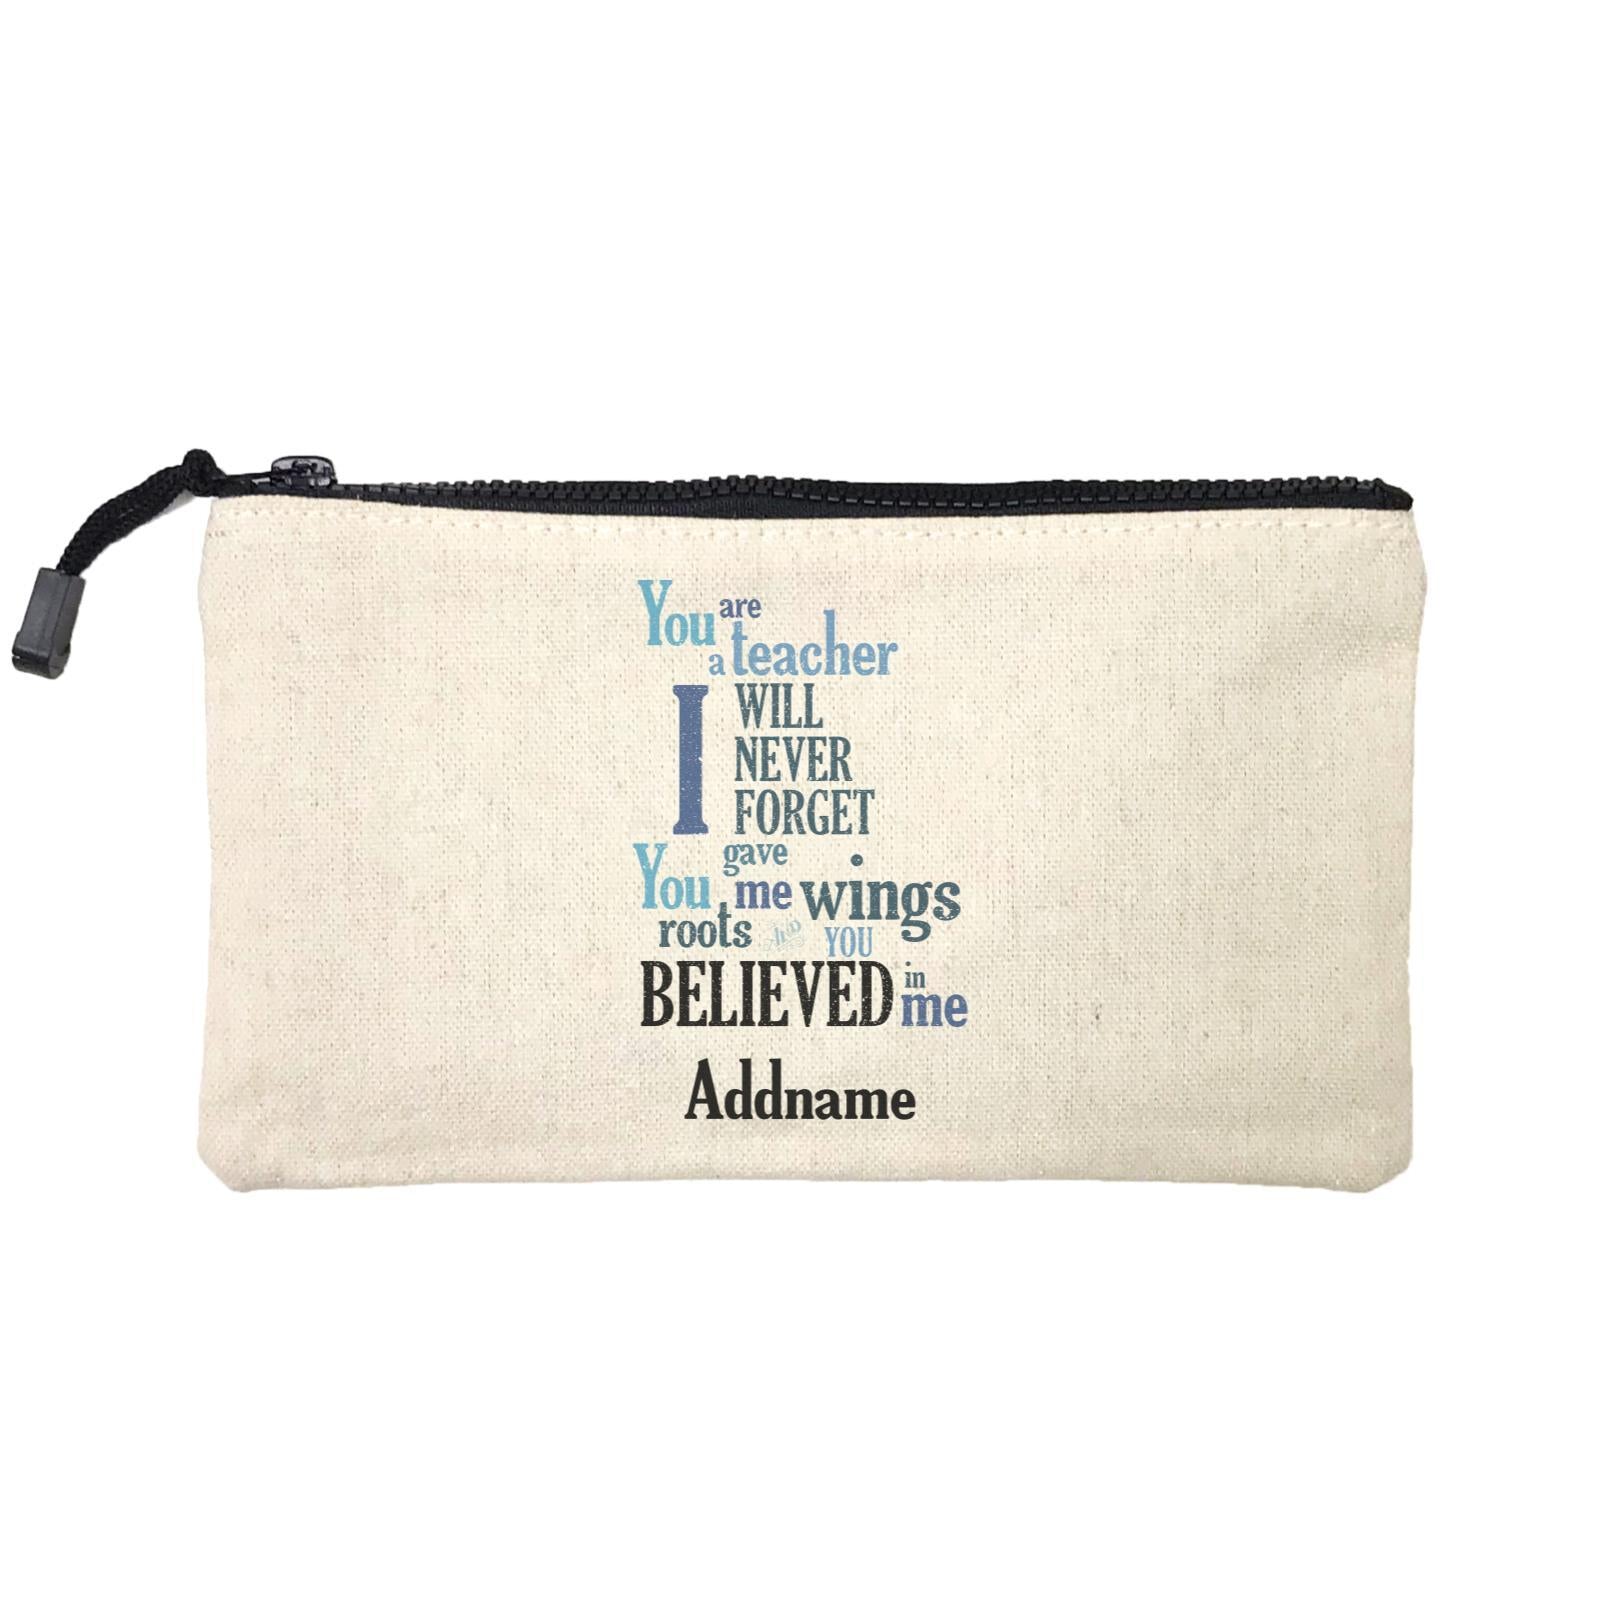 Super Teachers I Will Never Forget You Gave Me Wings Roots And You Believed In Me Addname Mini Accessories Stationery Pouch